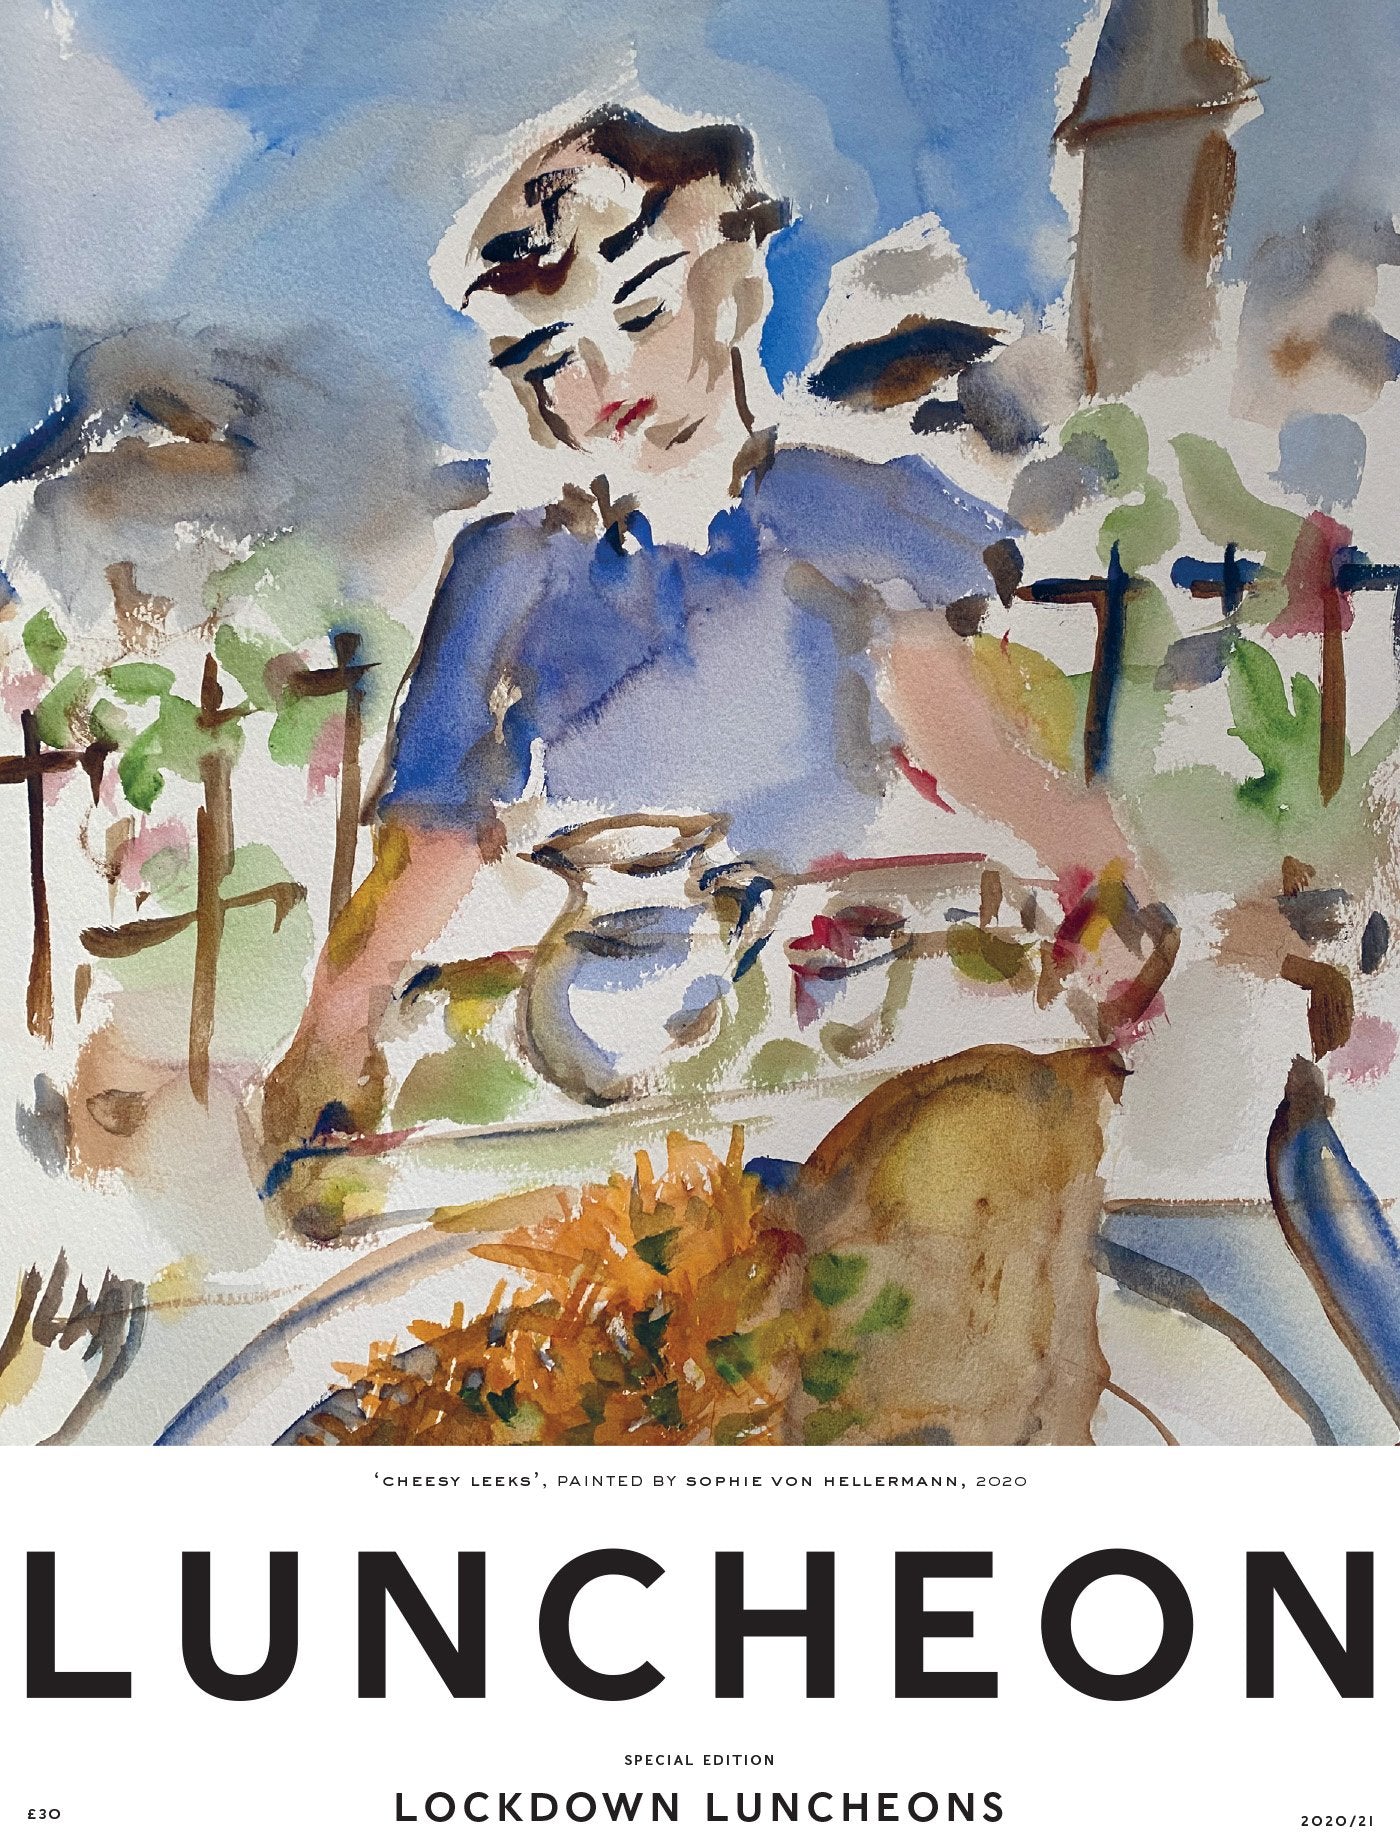 LUNCHEON - Magazine SPECIAL EDITION - RECIPE BOOK - (LOCKDOWN LUNCHEONS) view 2